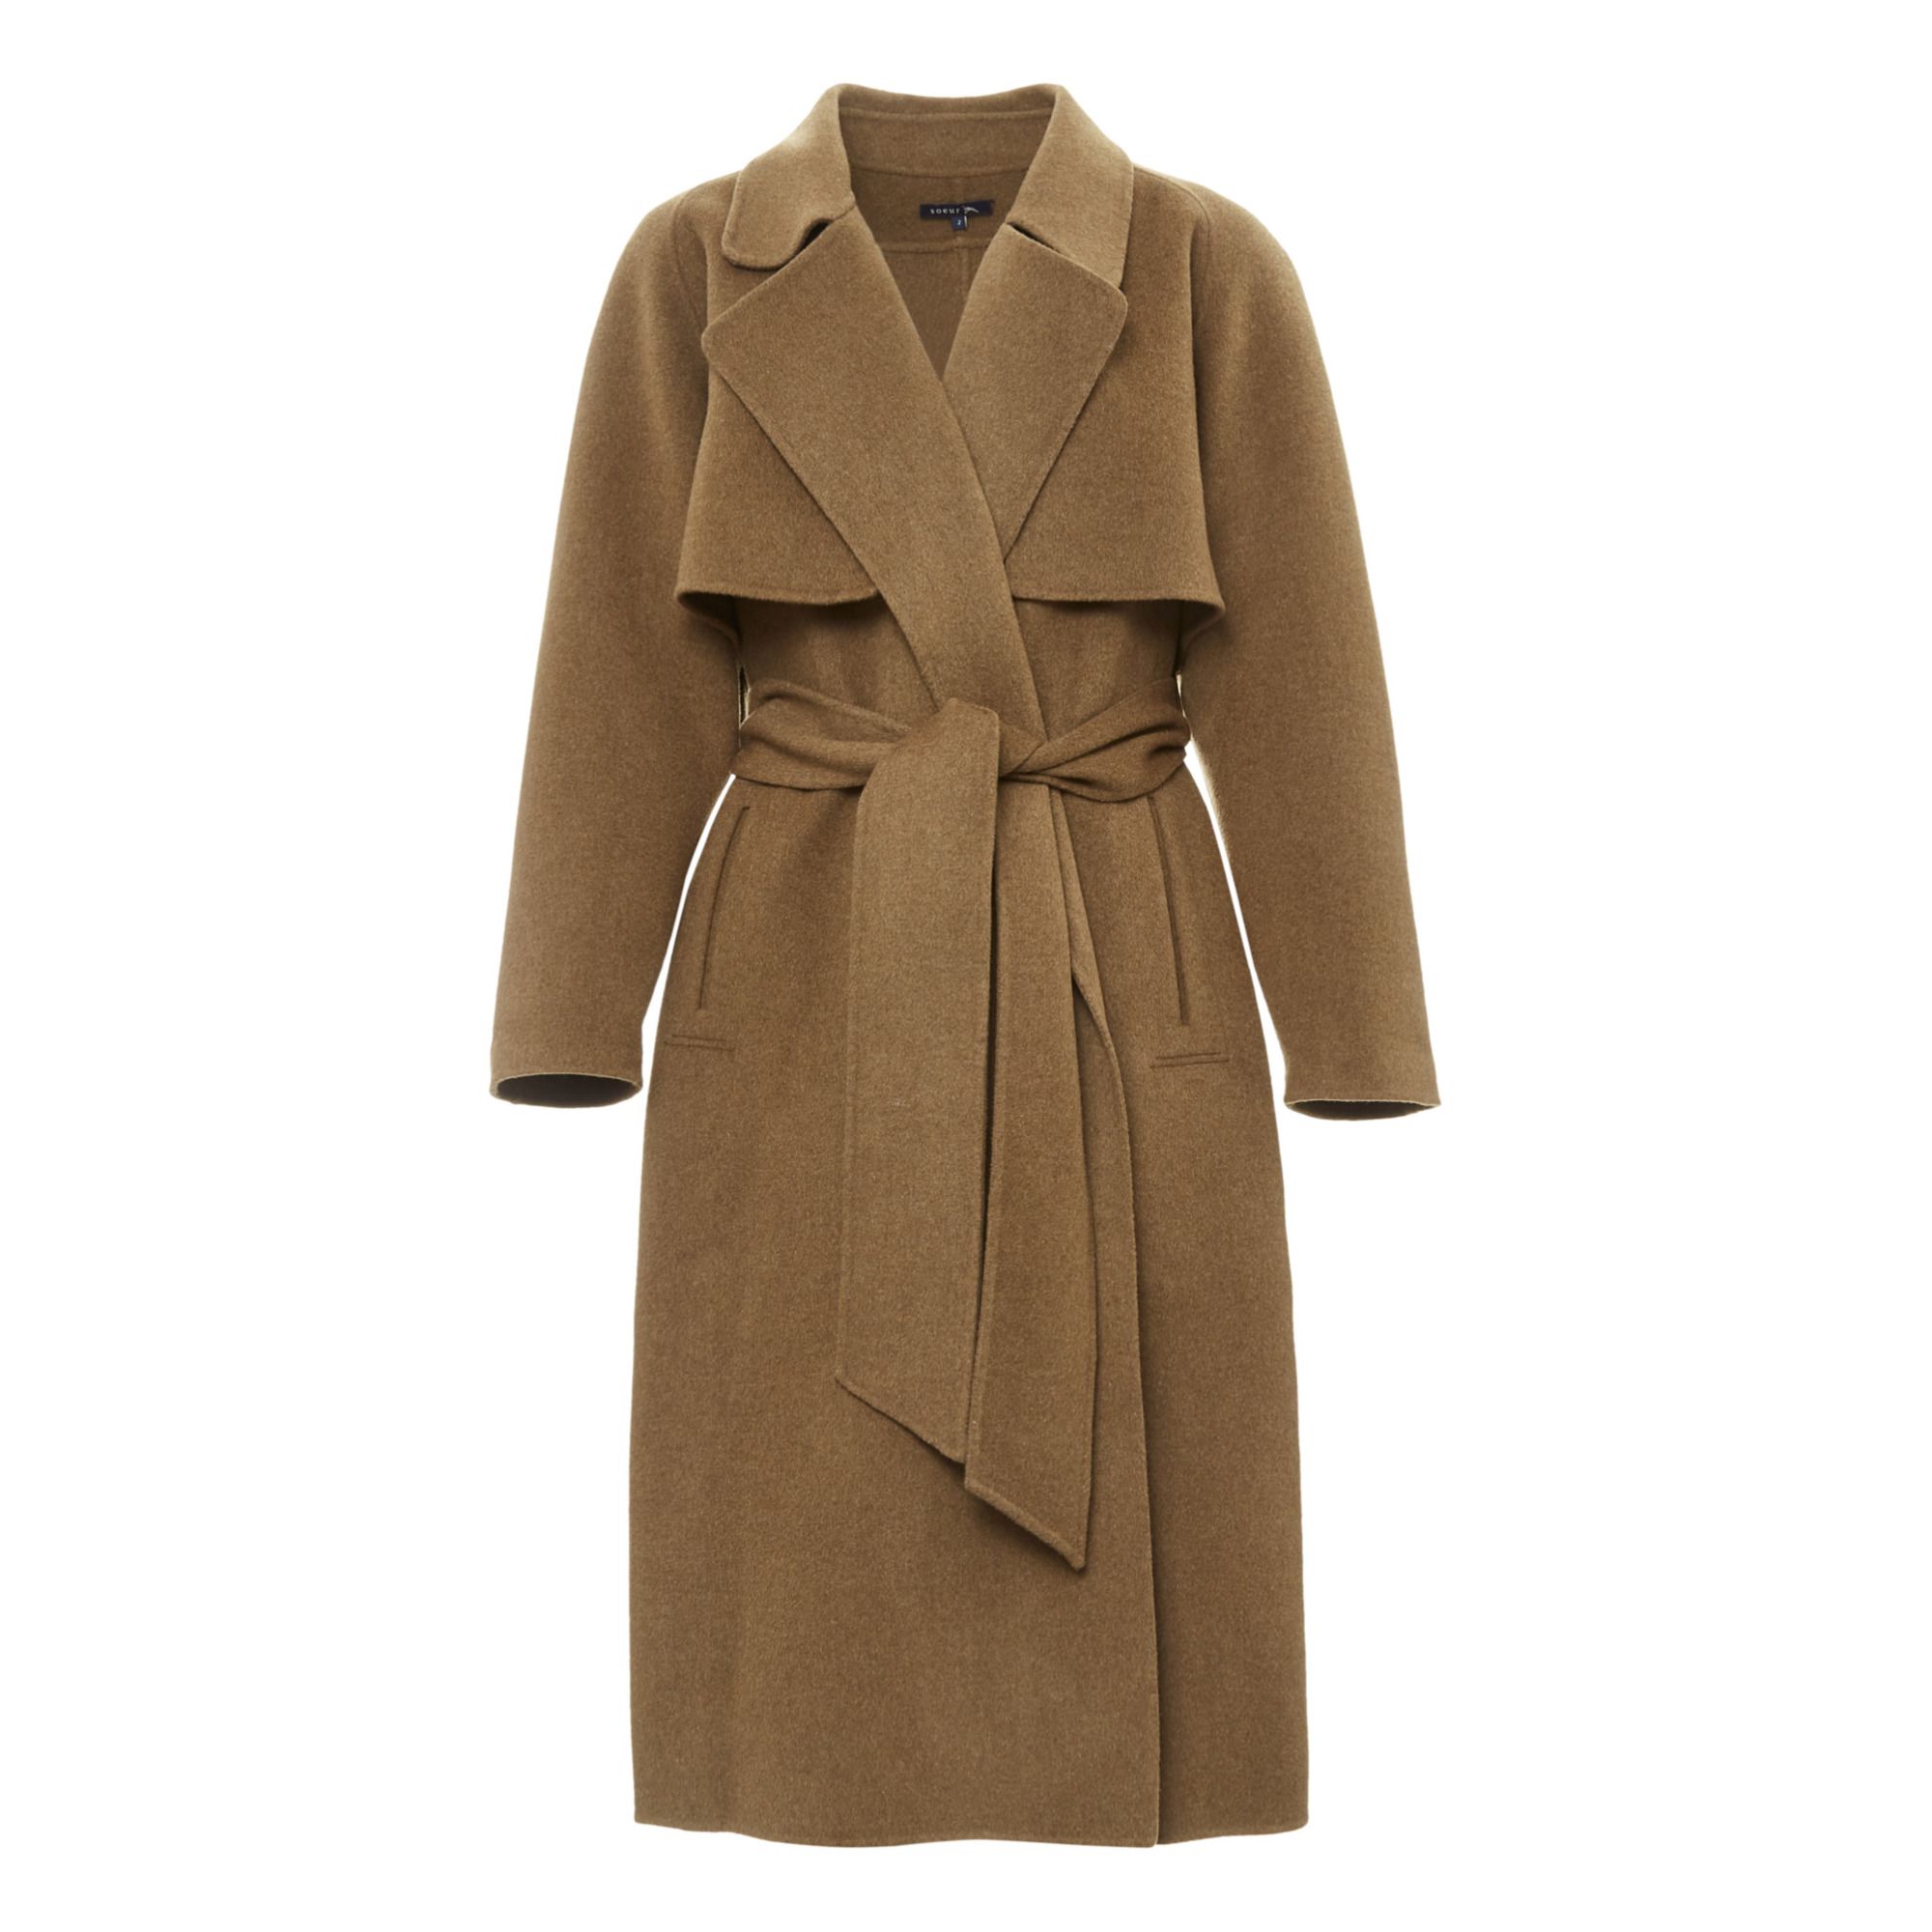 Soeur - Odeon Double-Sided Wool Coat - Tabacco | Smallable